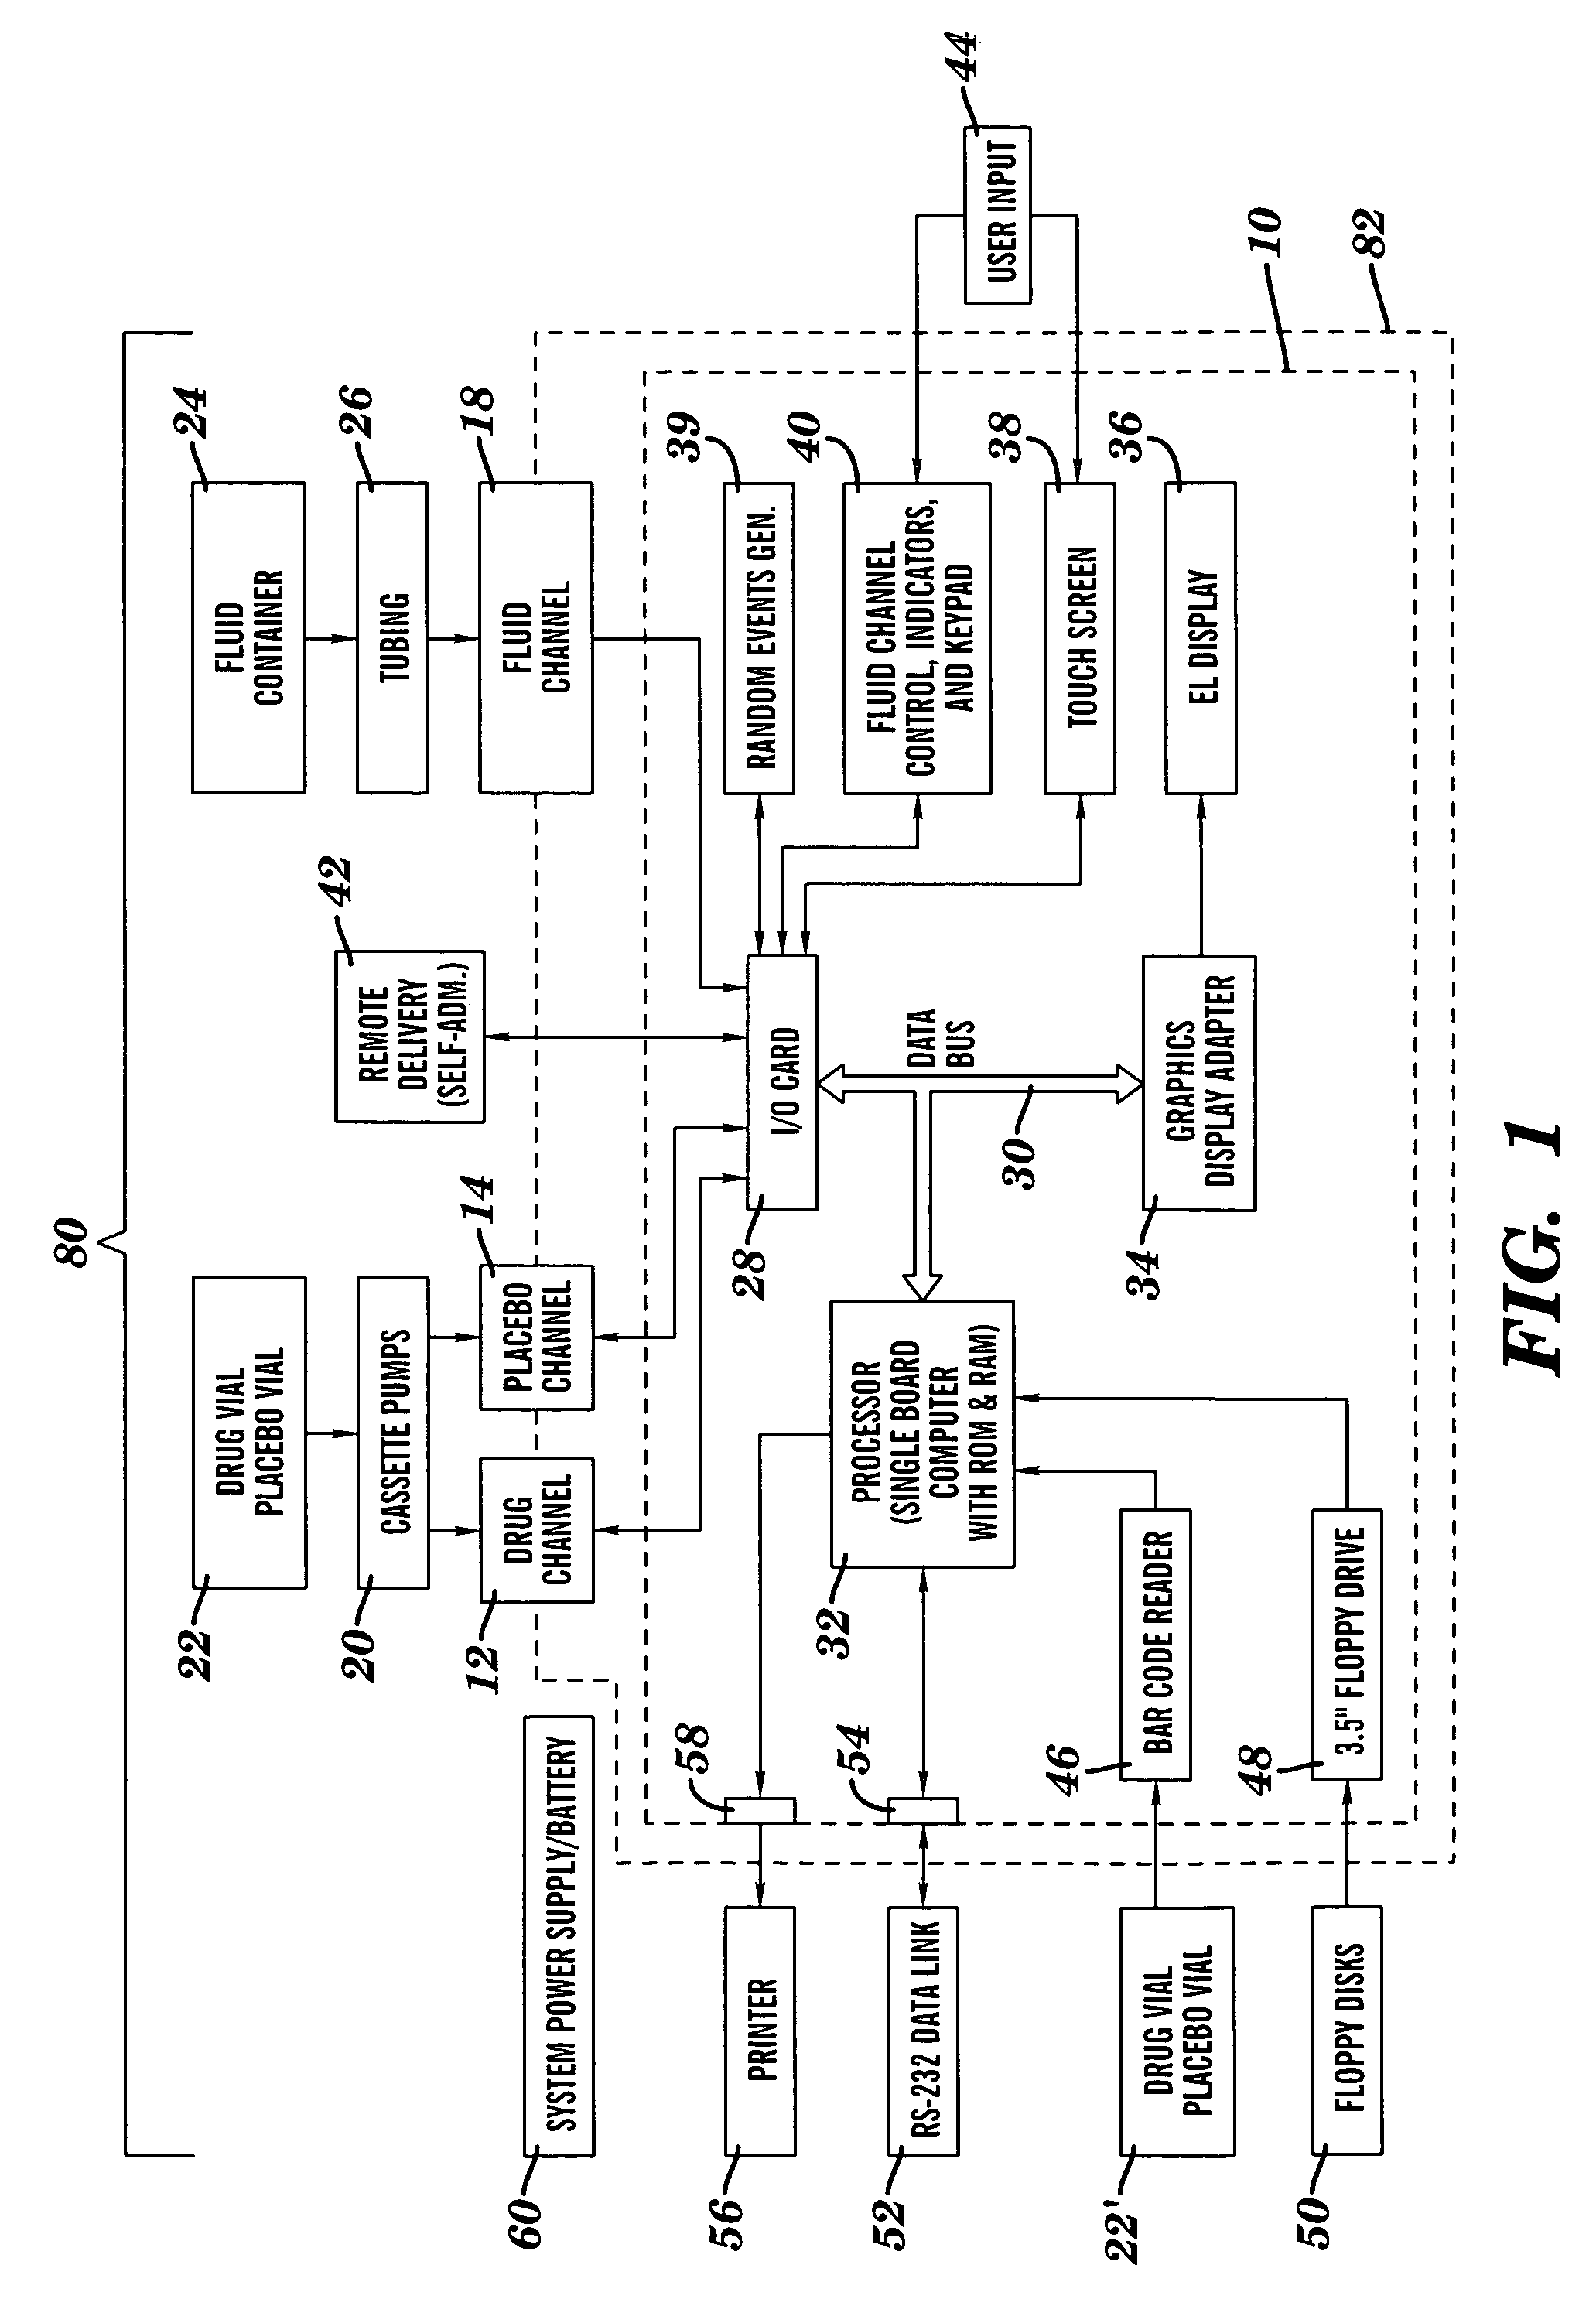 Method and device for administering medication and/or placebo